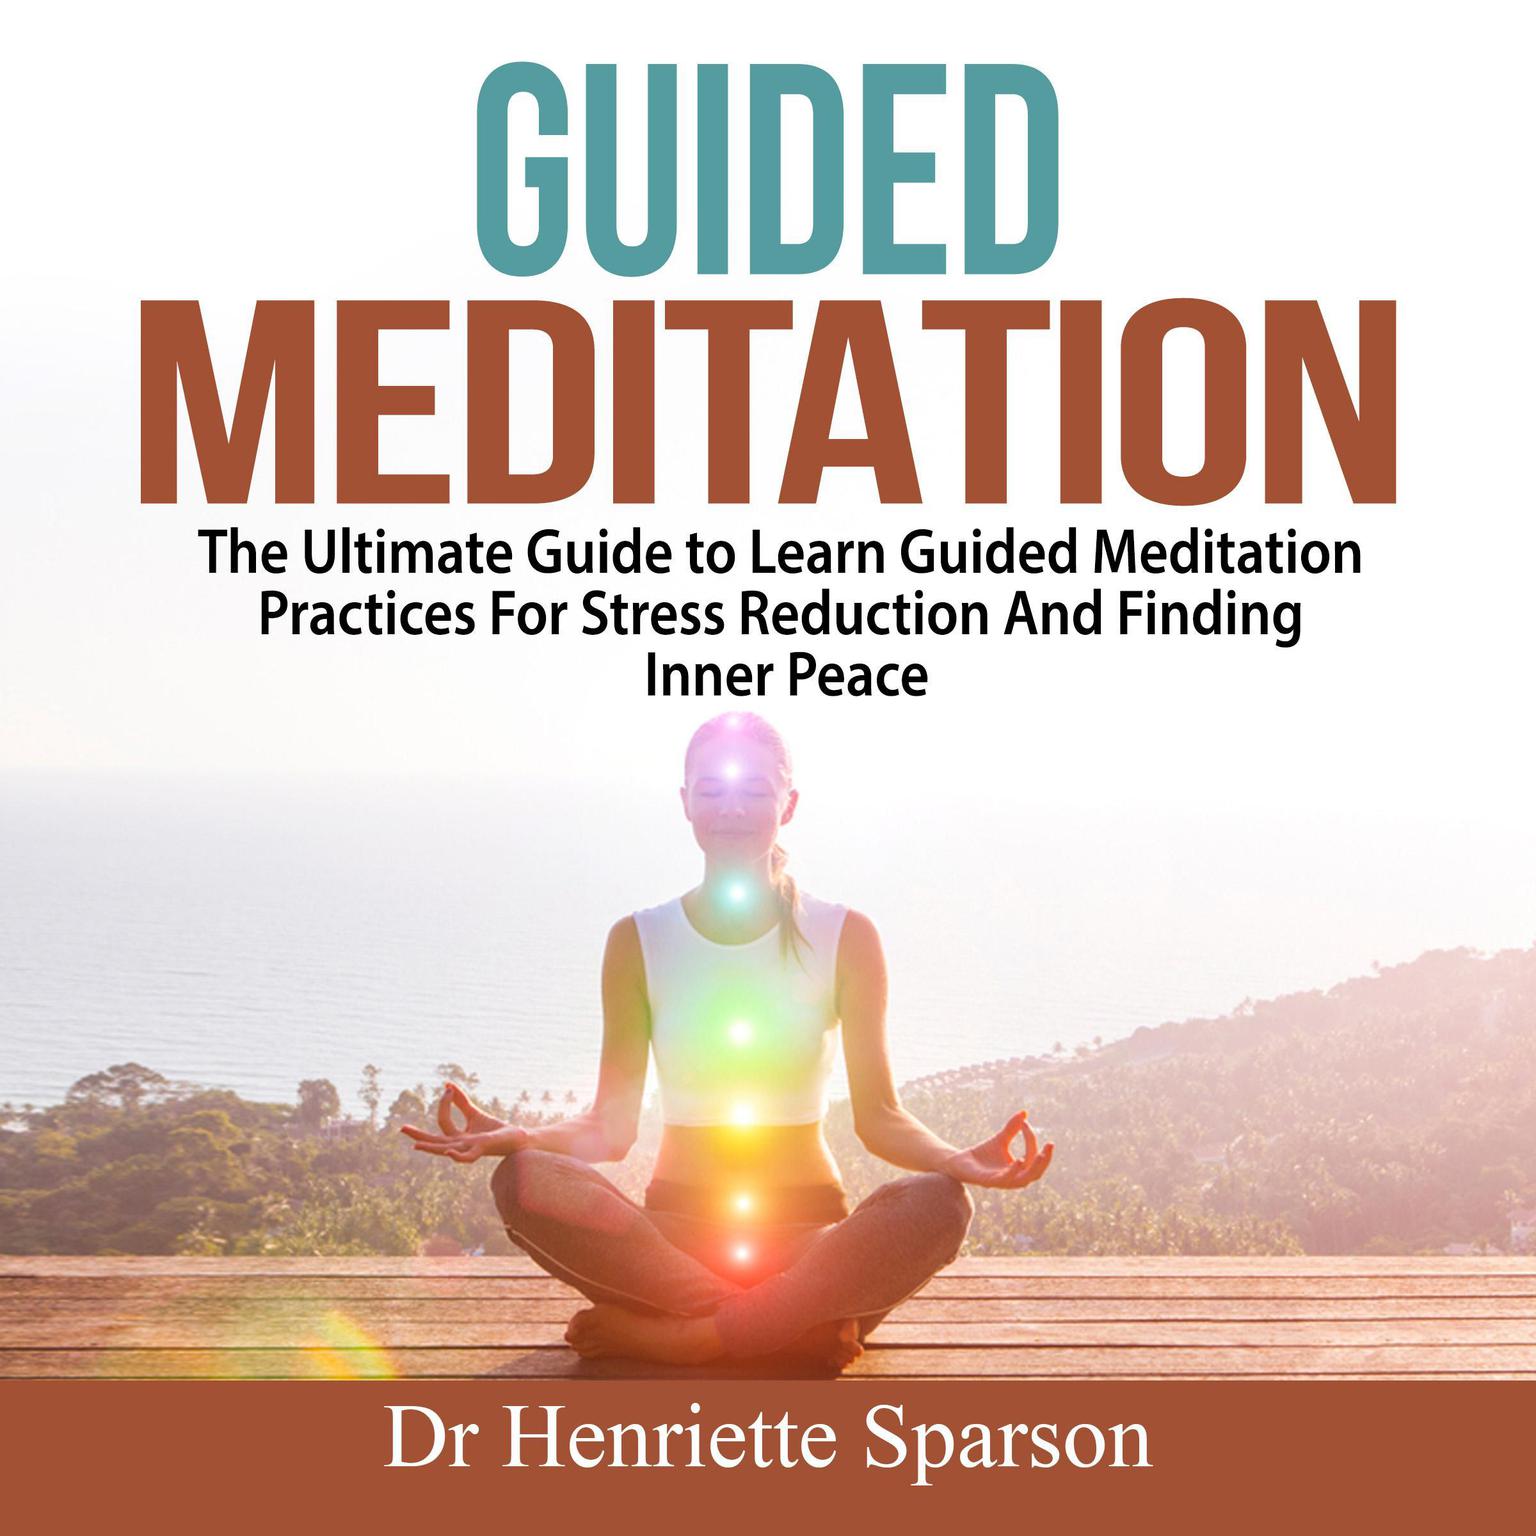 Guided Meditation: The Ultimate Guide to Learn Guided Meditation Practices For Stress Reduction And Finding Inner Peace Audiobook, by Dr Henriette Sparson